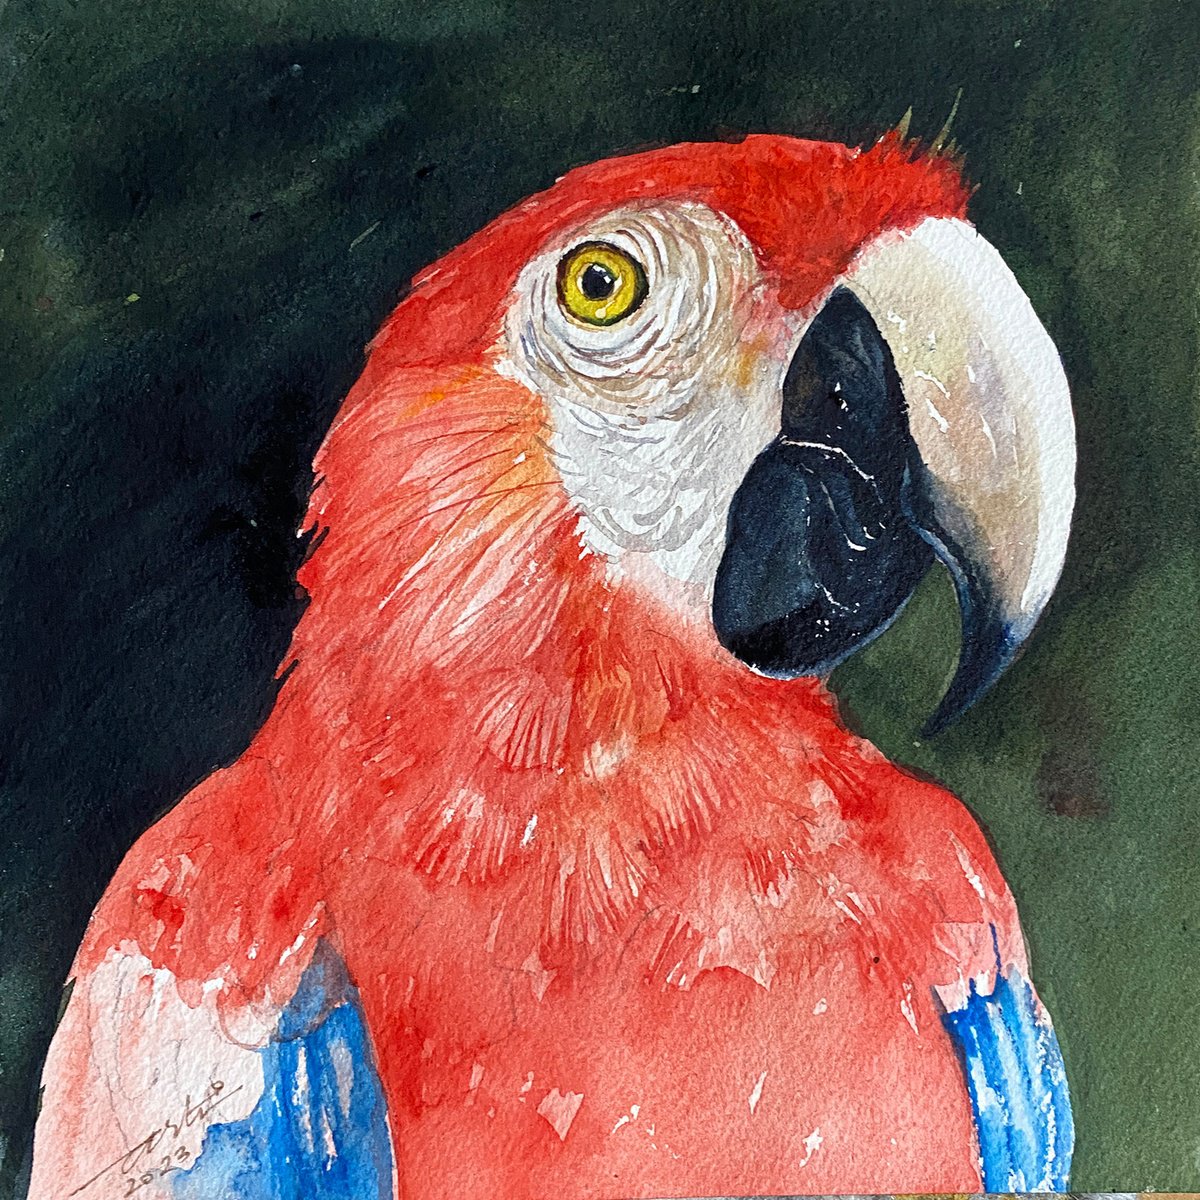 Redds_Macaw by Arti Chauhan